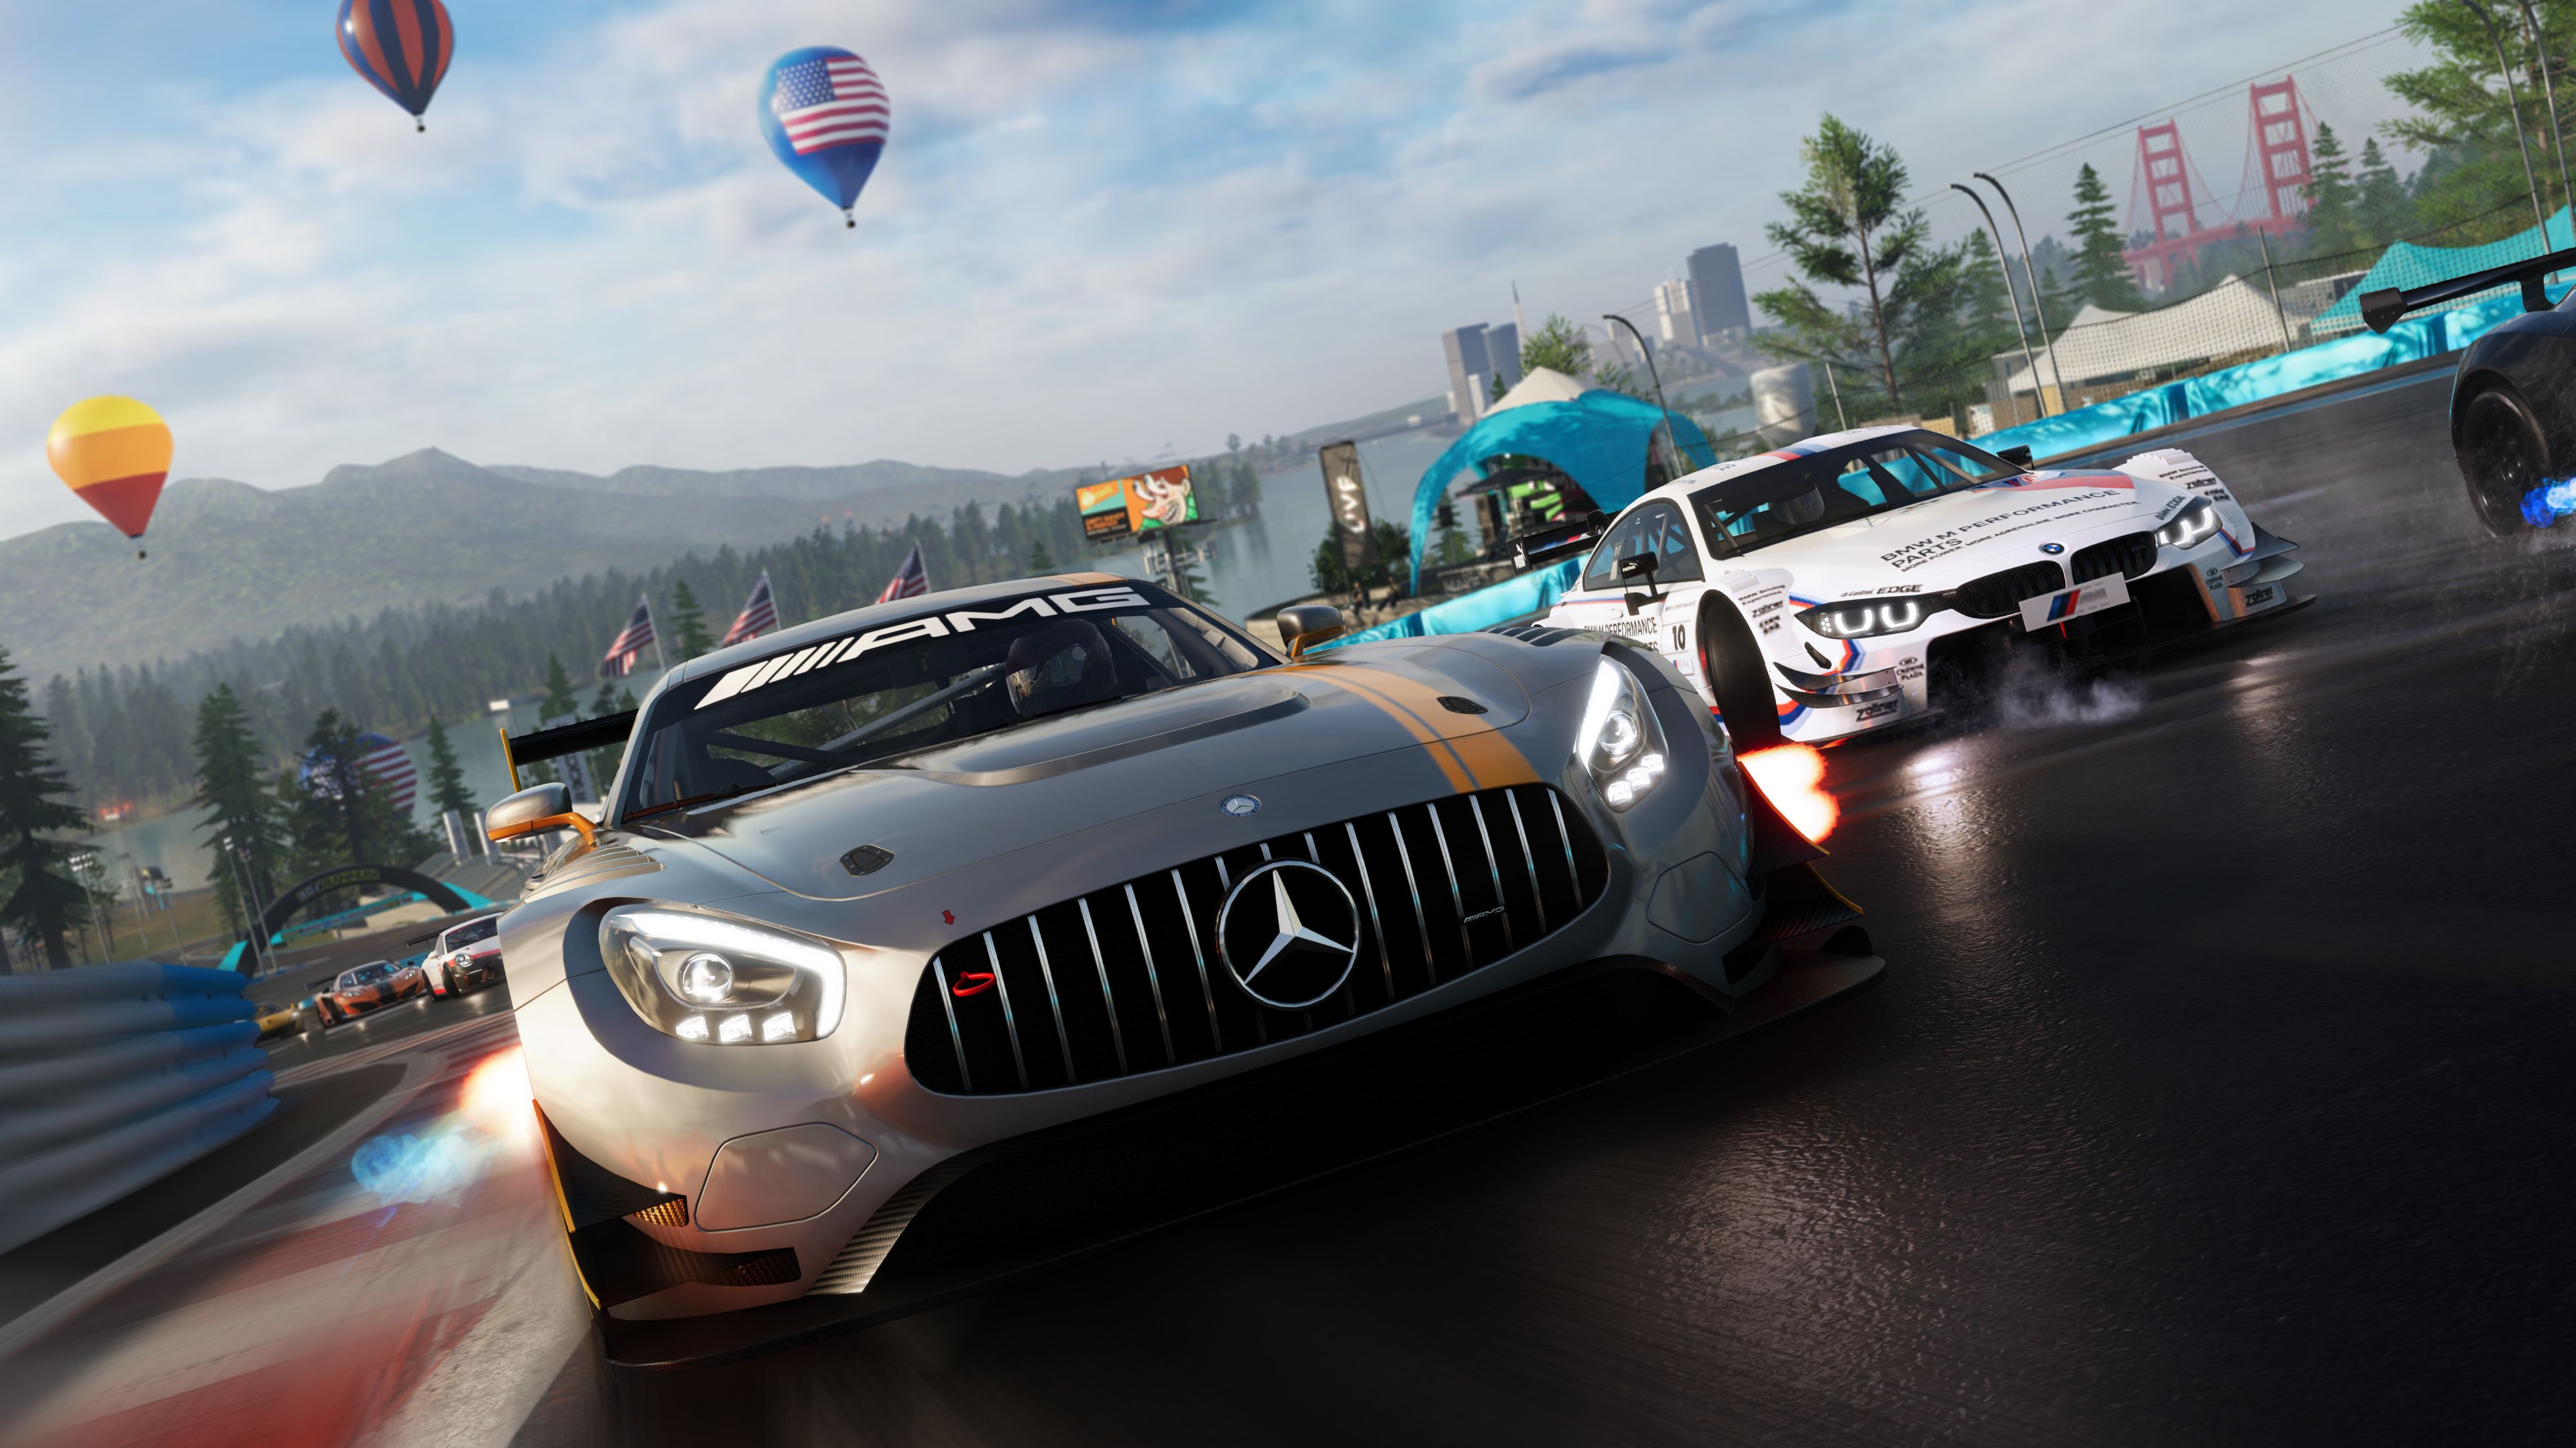 General 3842x2160 The Crew 2 video games The Crew Mercedes-Benz Mercedes-AMG GT BMW German cars Ubisoft frontal view headlights driving racing sky clouds hot air balloons video game art vehicle trees logo helmet mountains race tracks